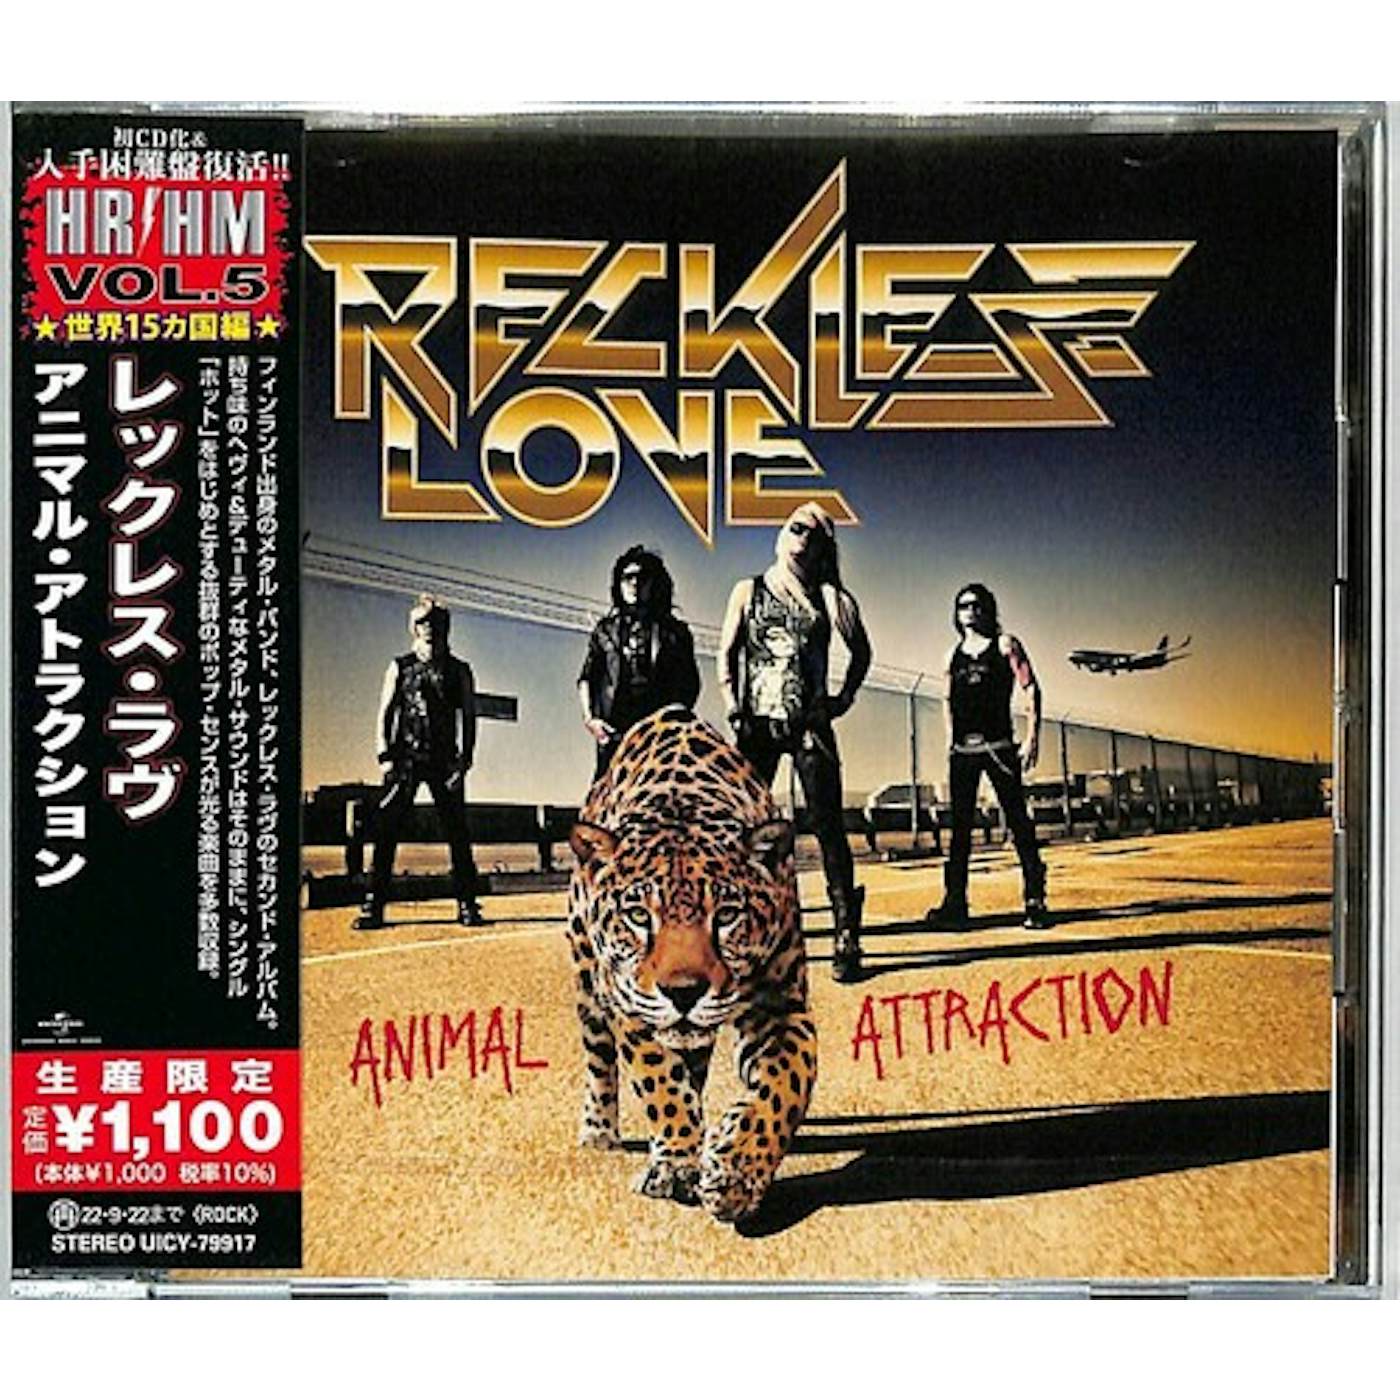 Reckless Love ANIMAL ATTRACTION CD